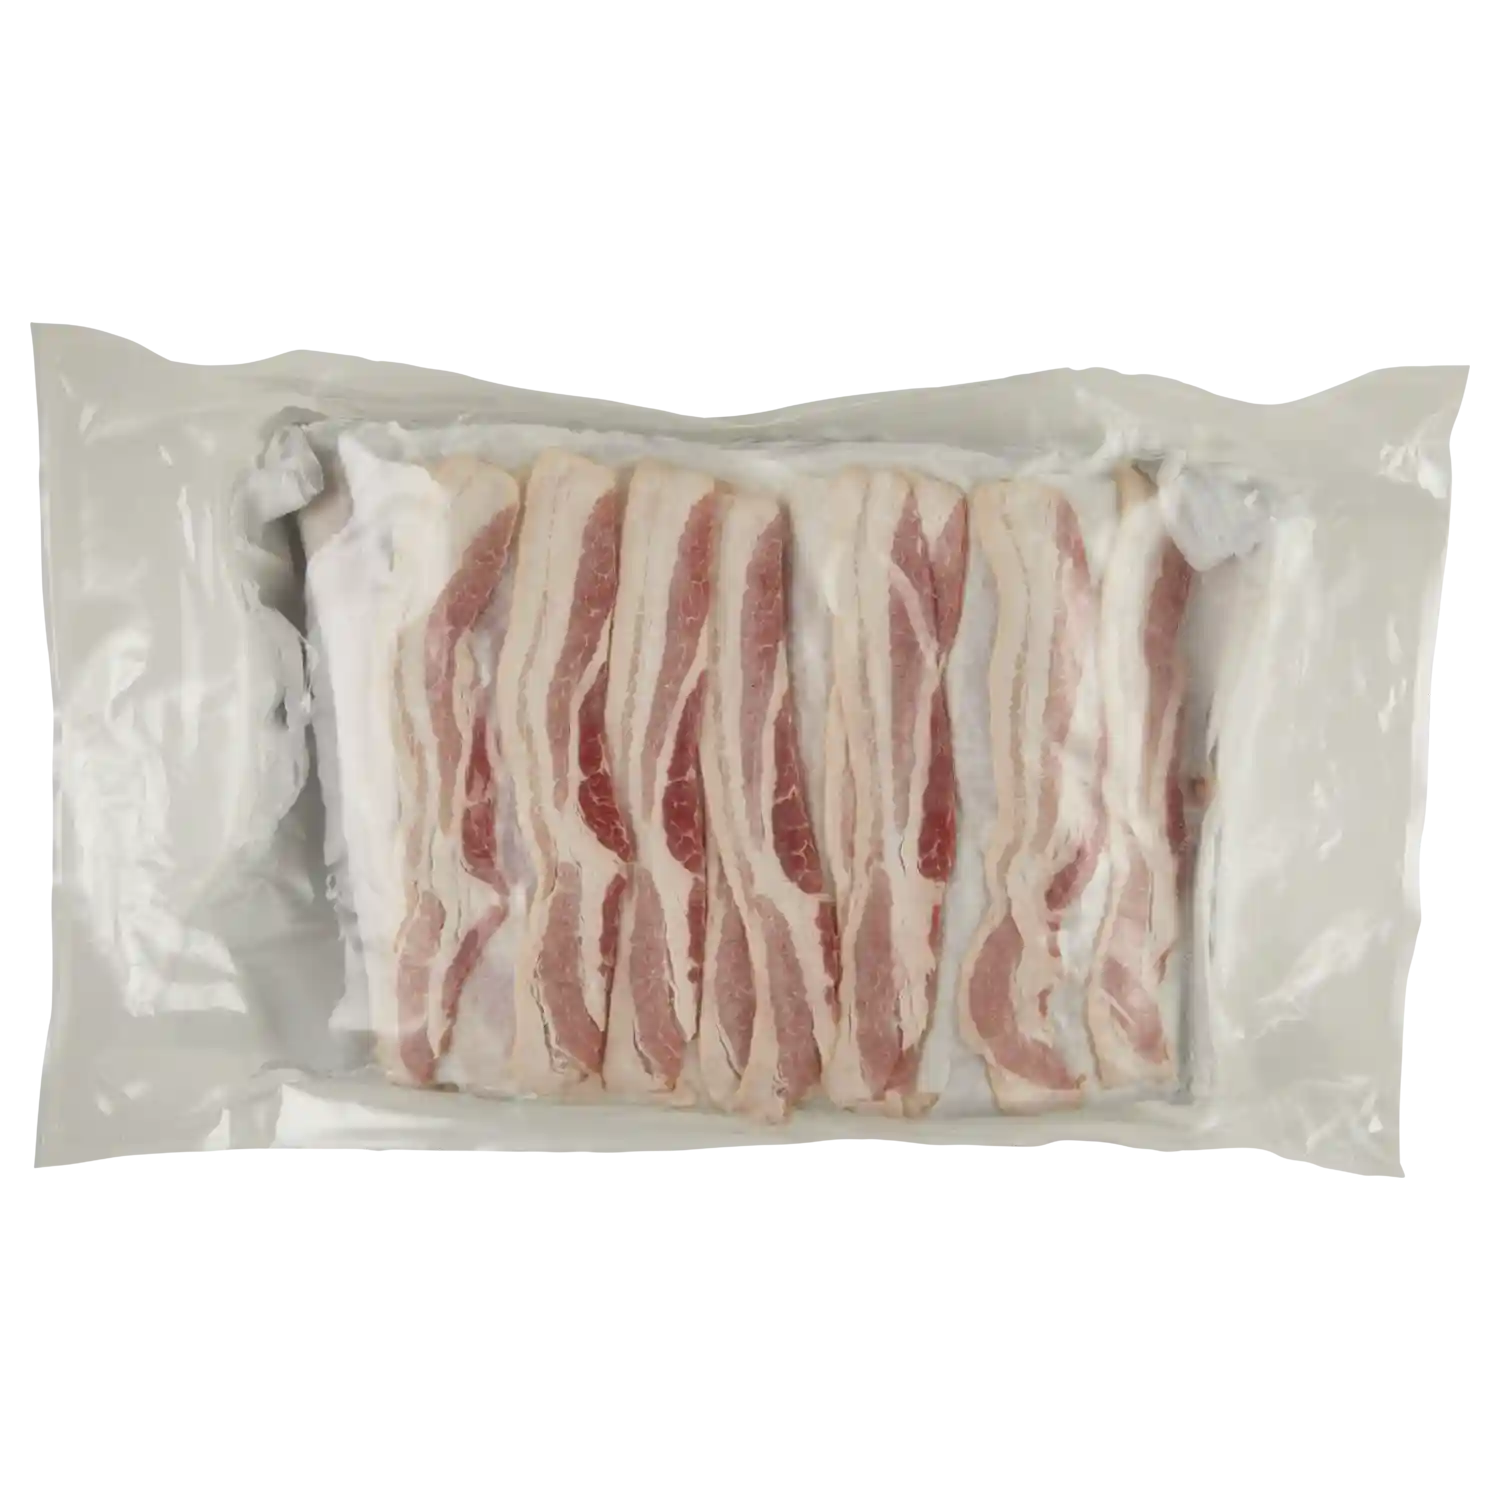 Wright® Brand Naturally Hickory Smoked Thin Sliced Bacon, Flat-Pack®, 15 Lbs, 18-22 Slices per Pound, Gas Flushed_image_31